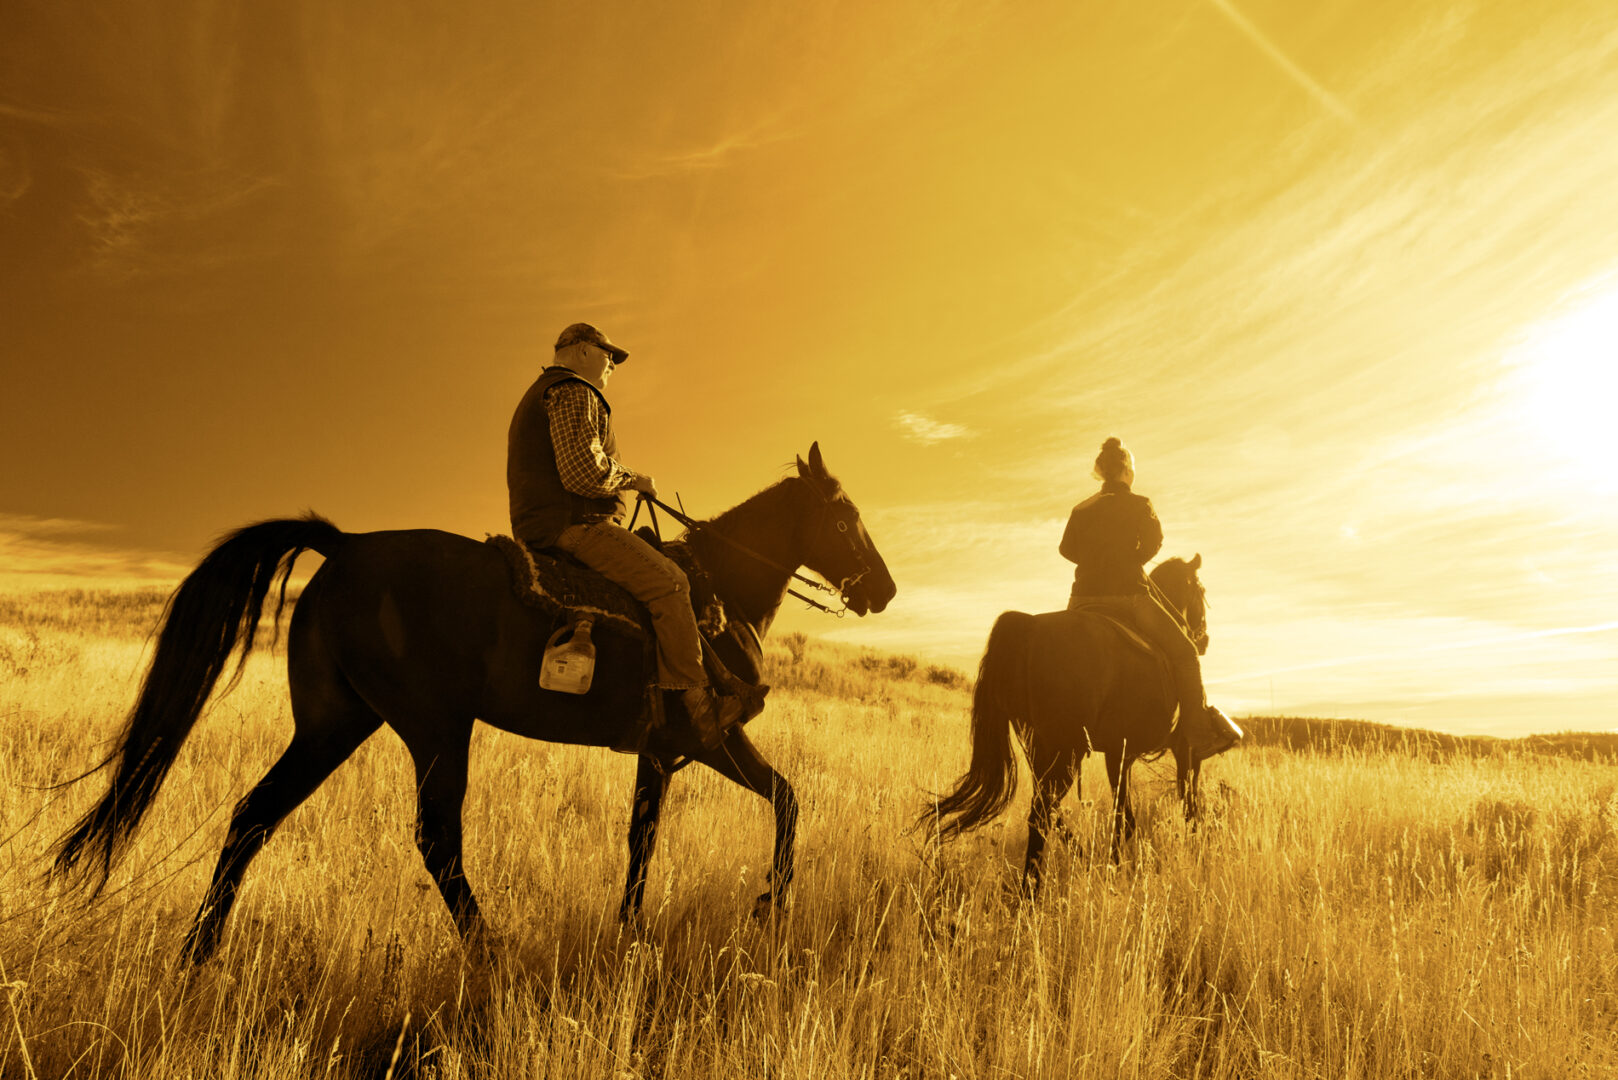 Kamloops rural life people riding horses into the sunset sepia color